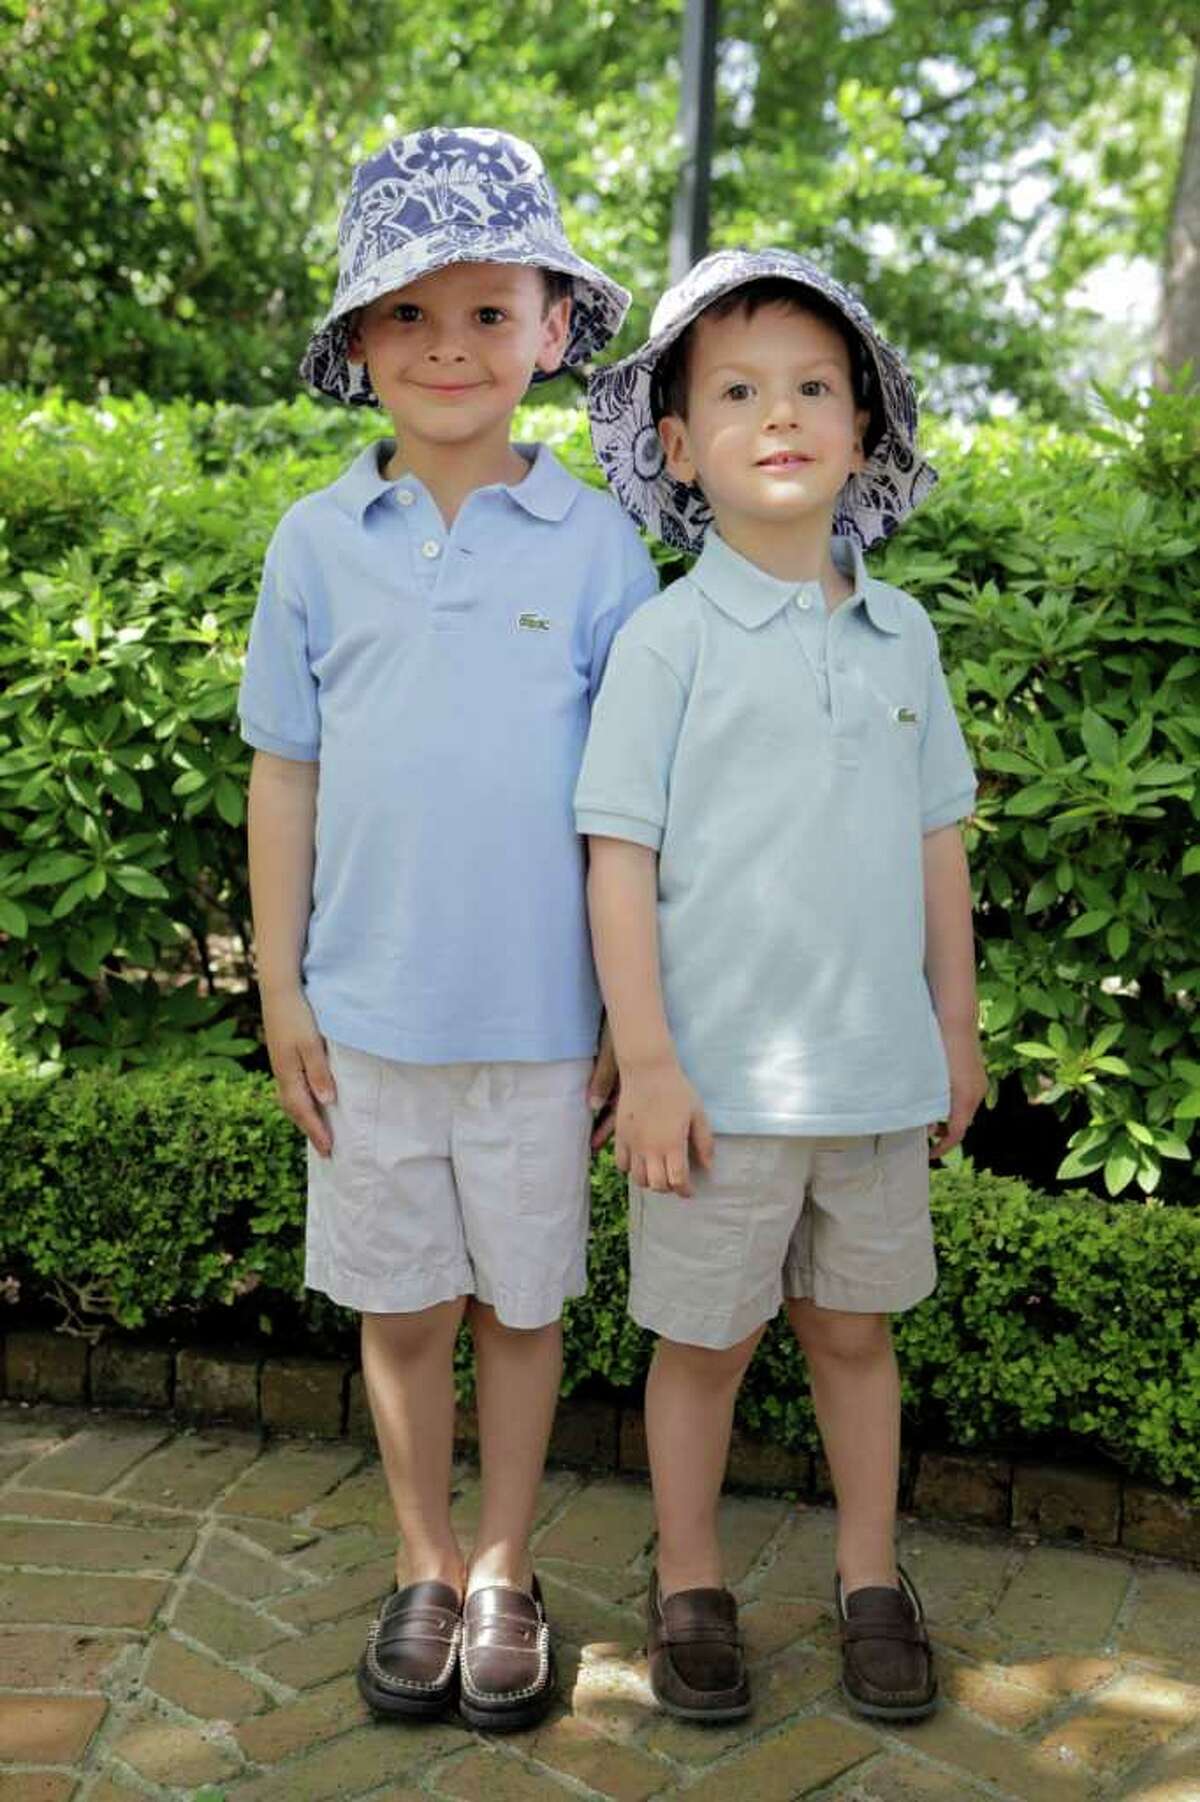 Brothers Ezra Segal, 5, left, and Nathan Segal, 3, pose for a portrait.